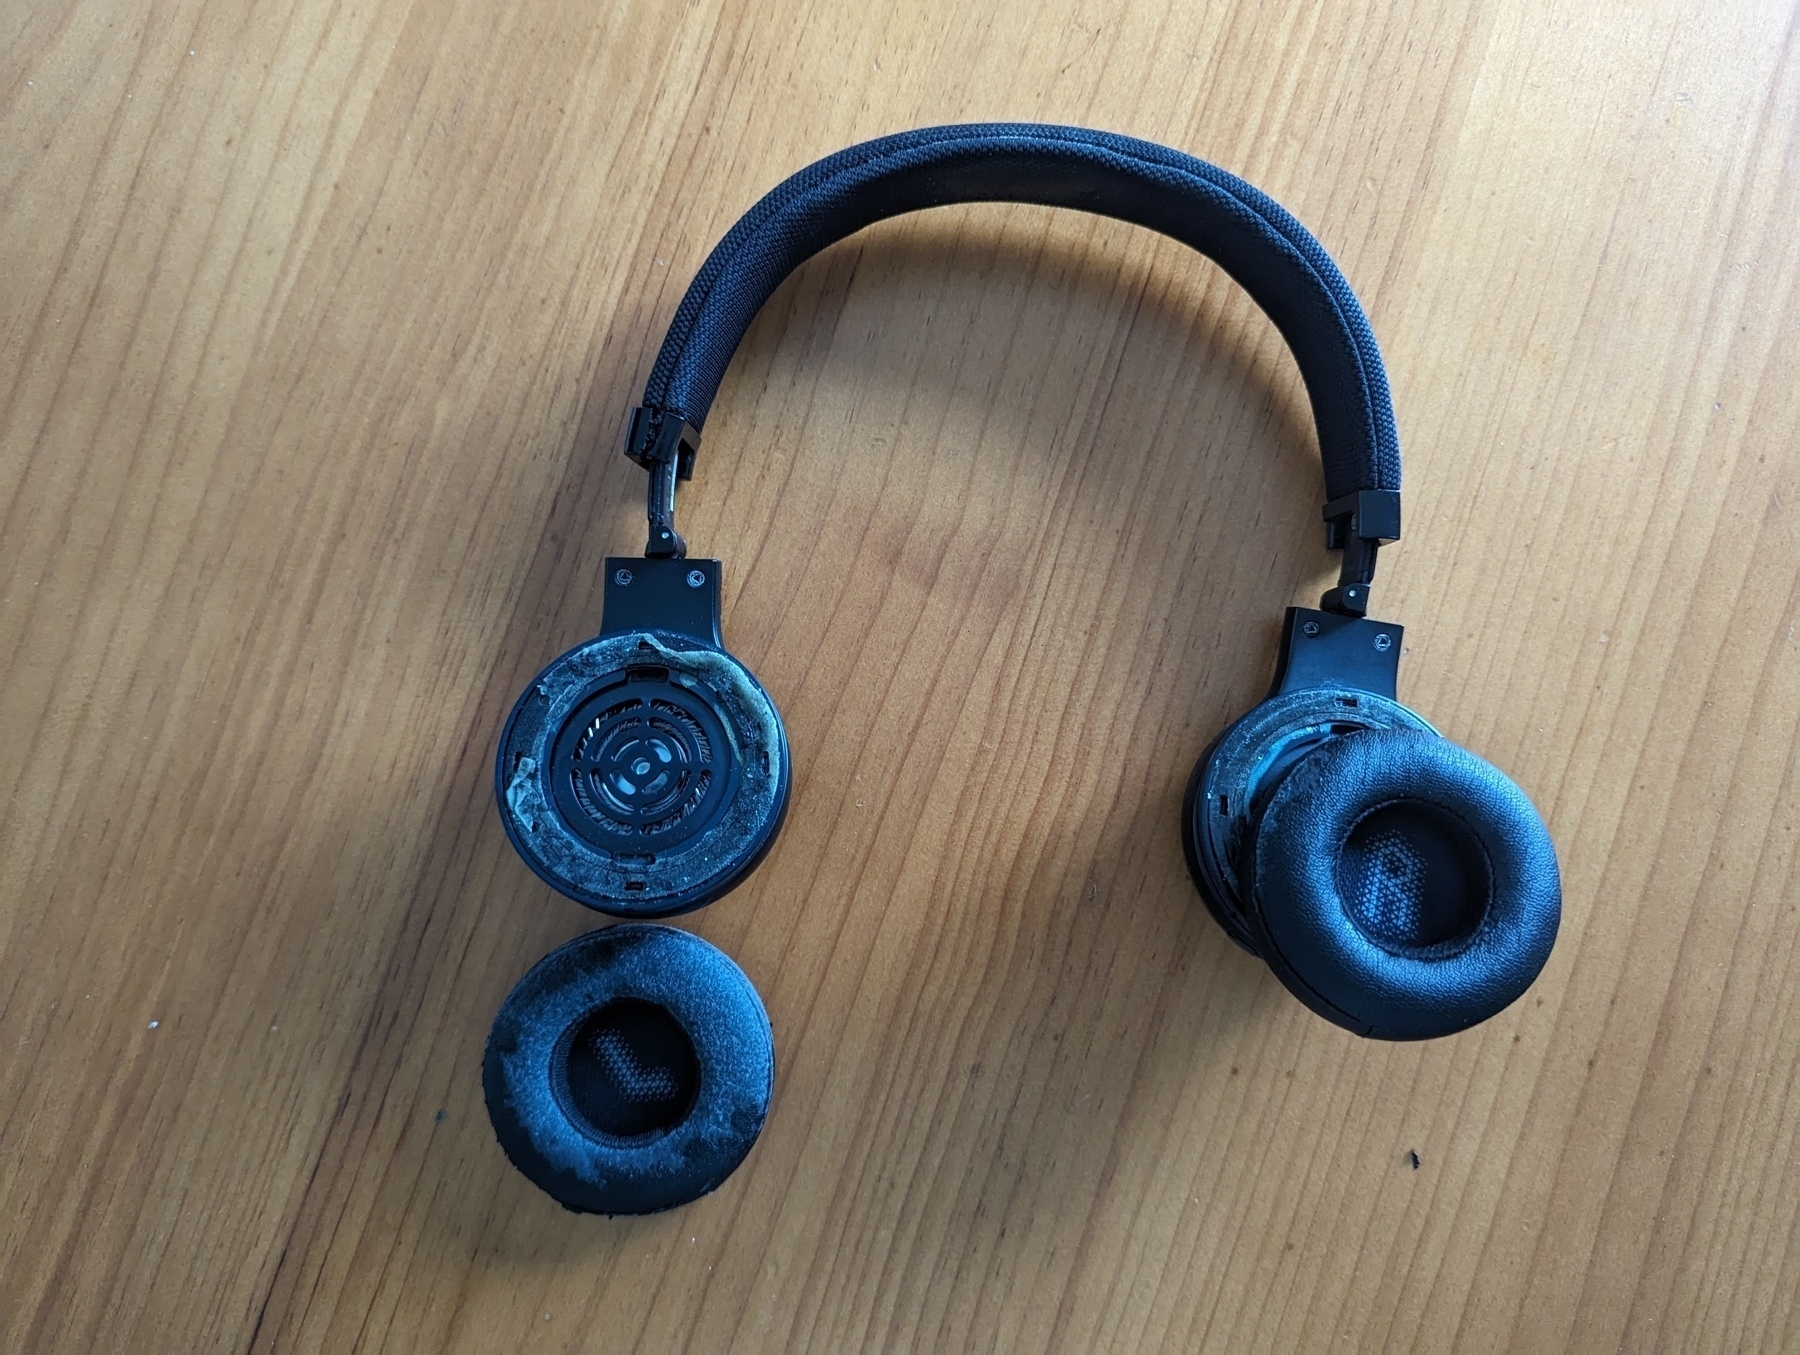 A black bluetooth headphone on a table, with the left cup fallen off exposing the speaker, and the right cup slightly removed from it's original position